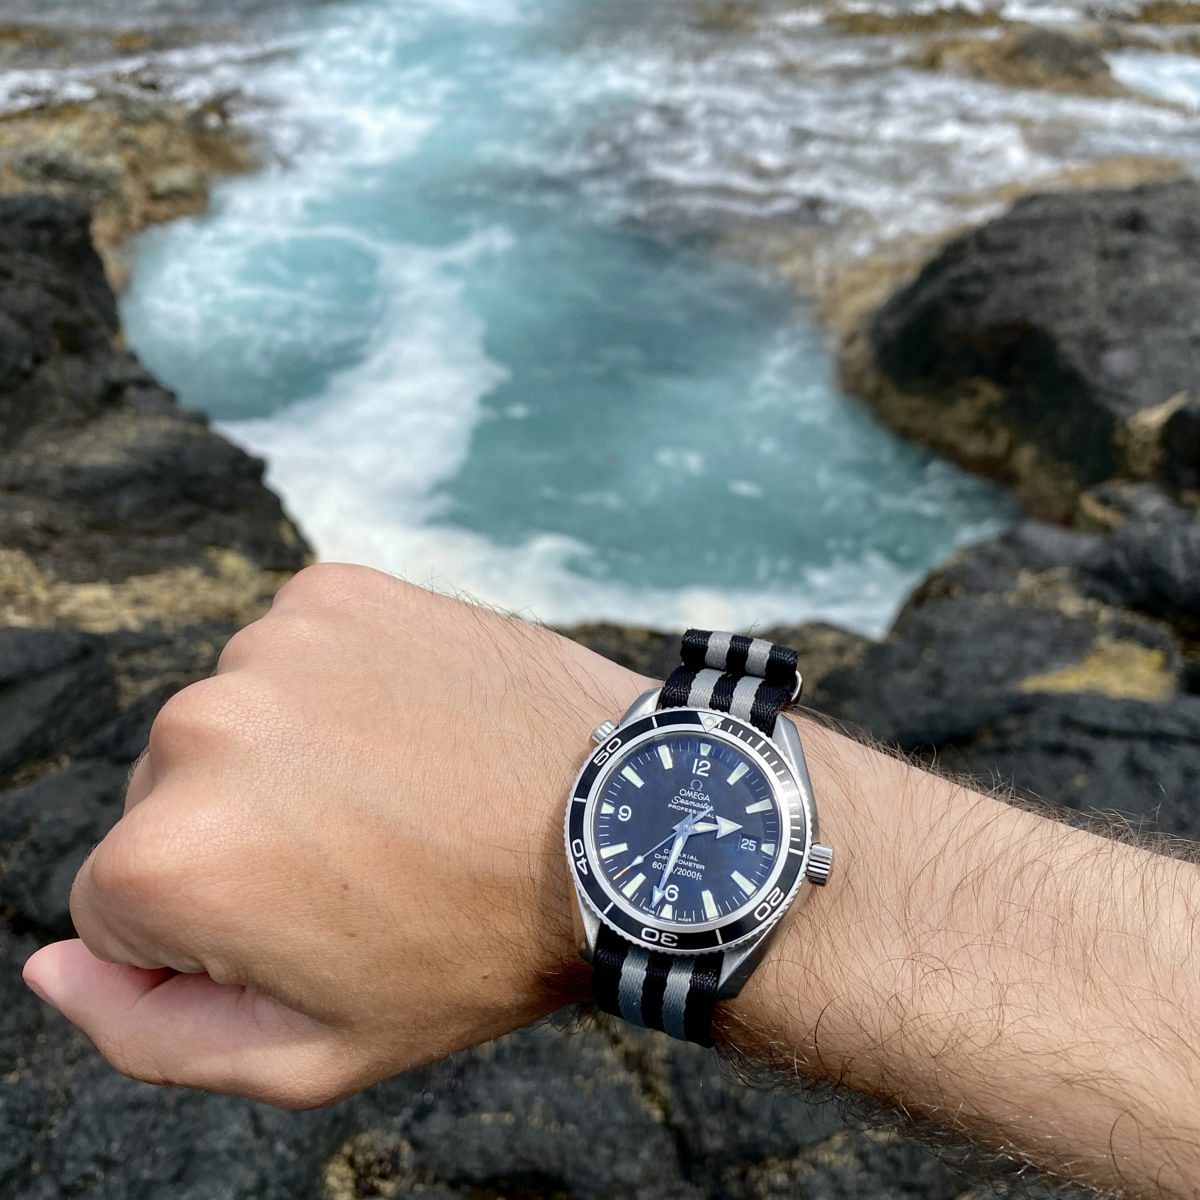 Here’s why the 2008 Omega Planet Ocean continues to be the watch I wear the most